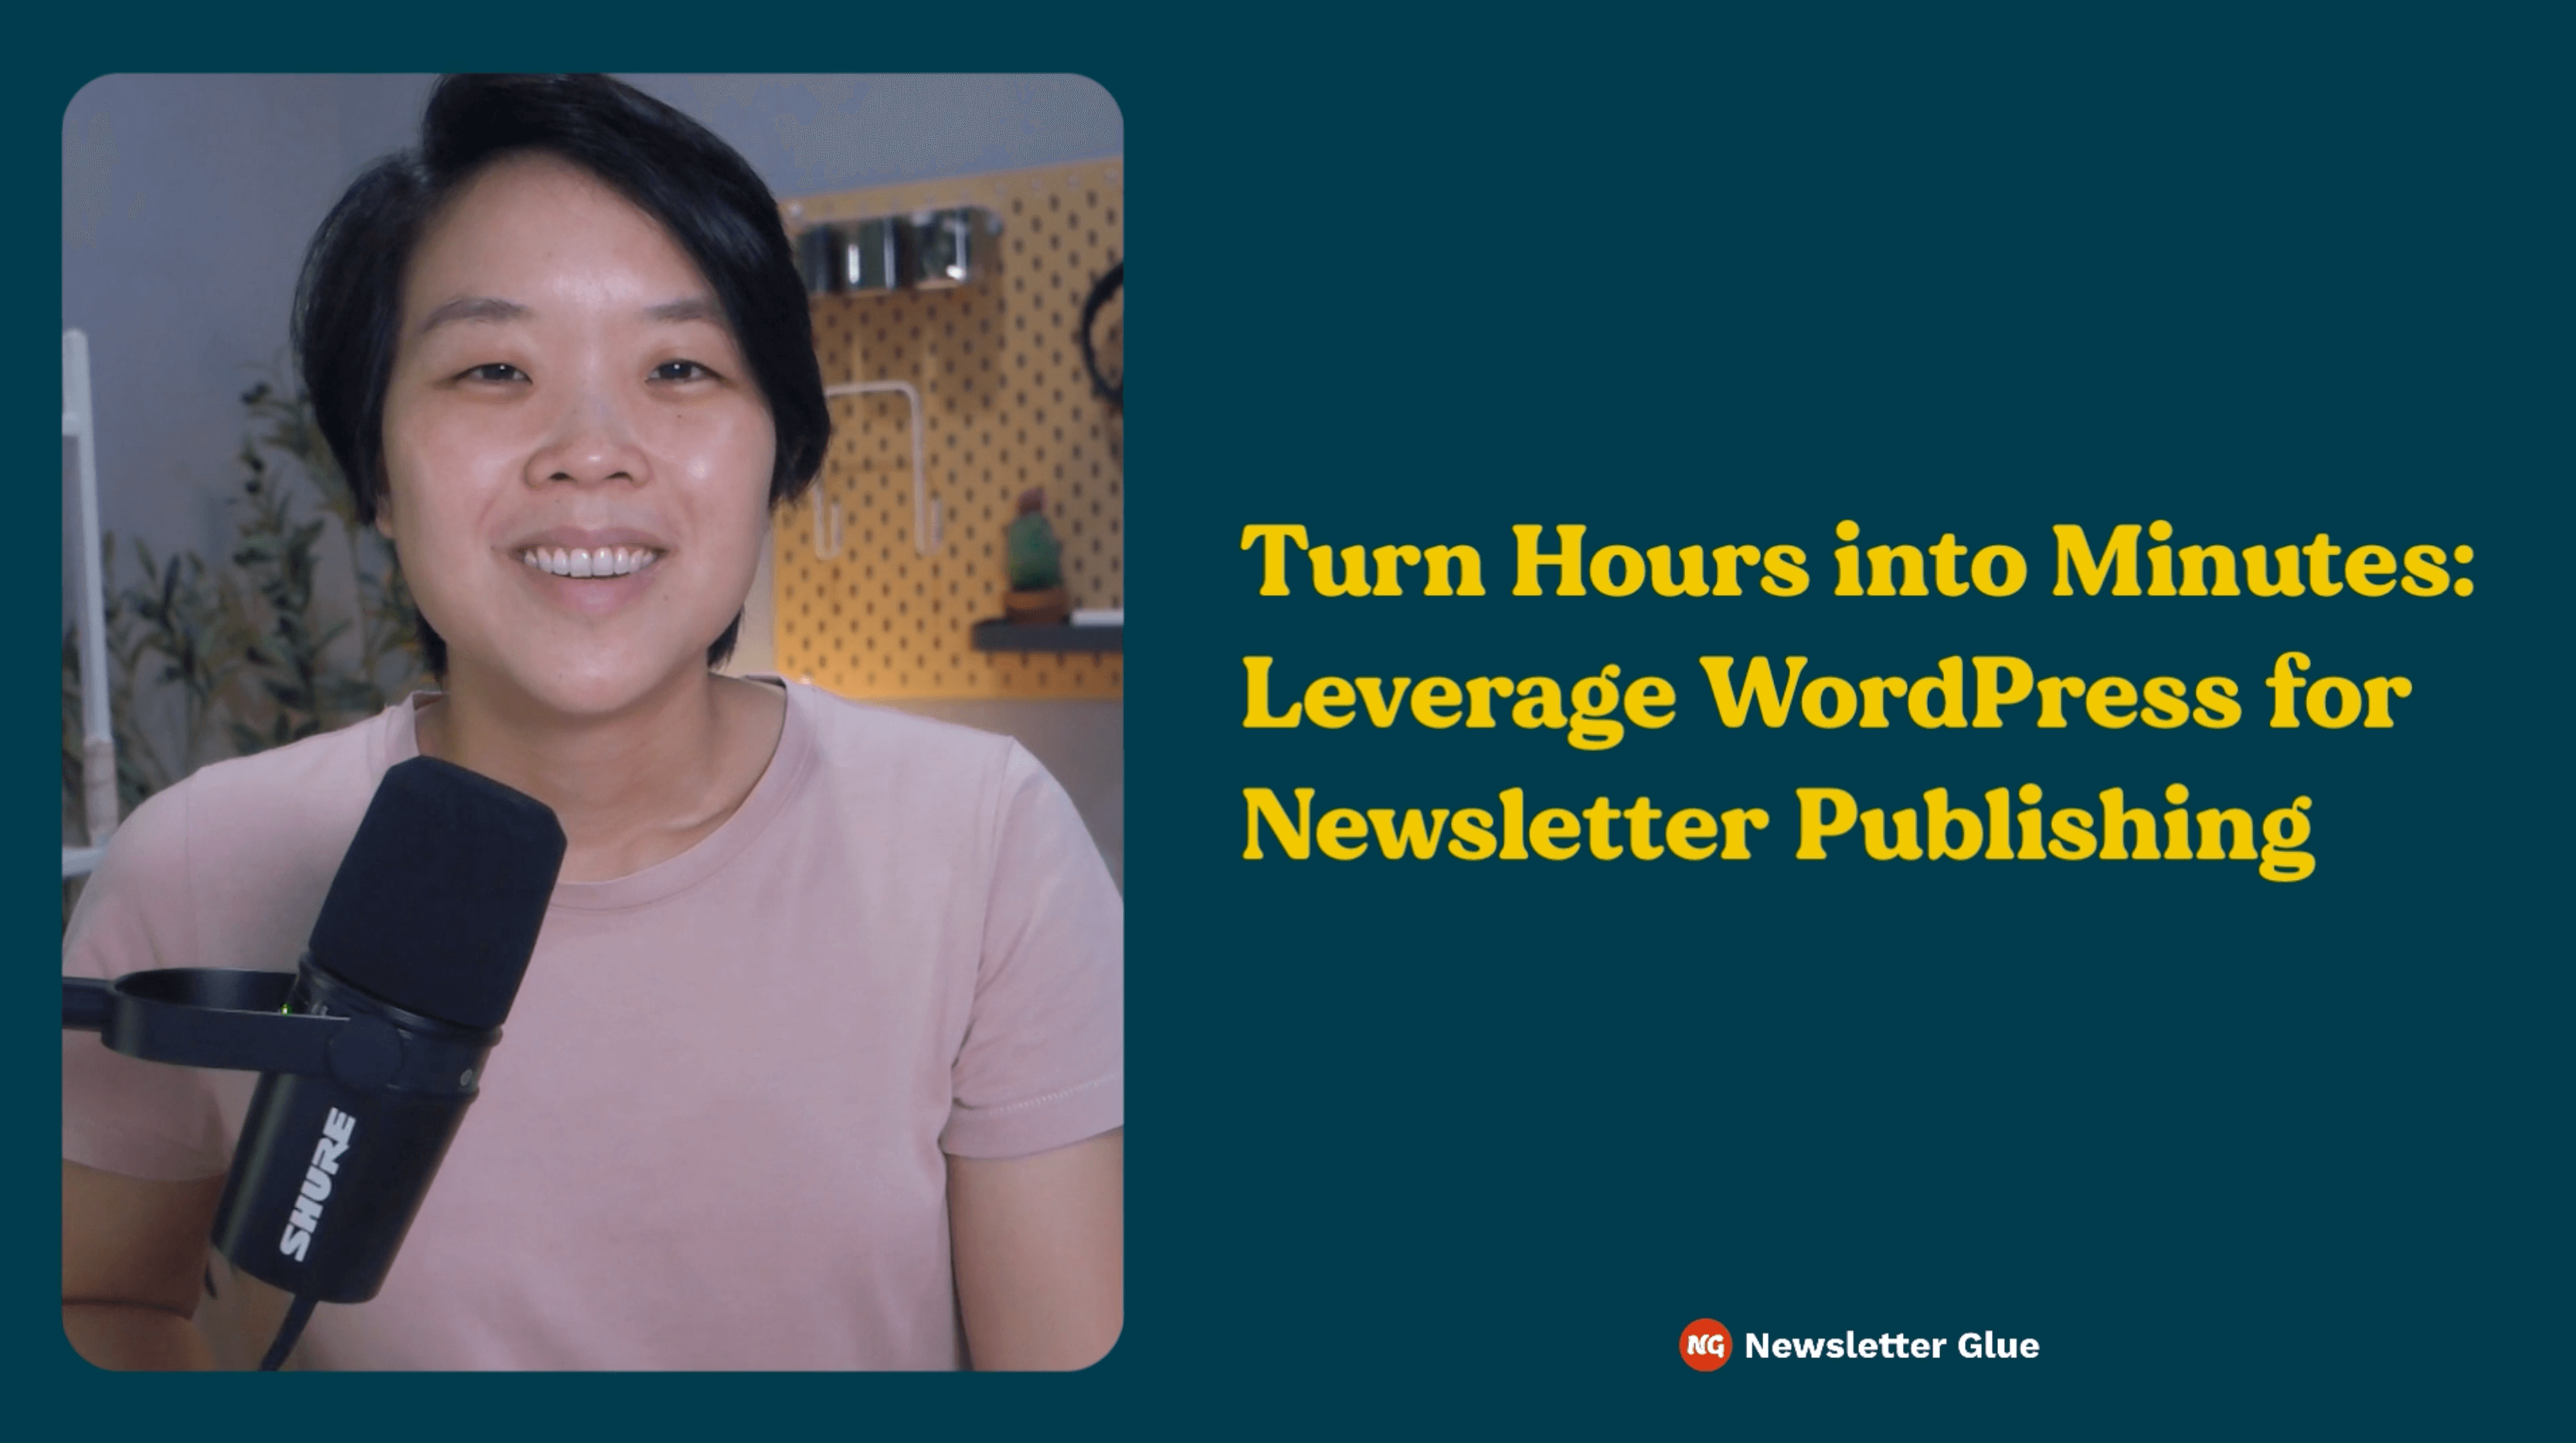 Turn Hours into Minutes: Leverage WordPress for Newsletter Publishing